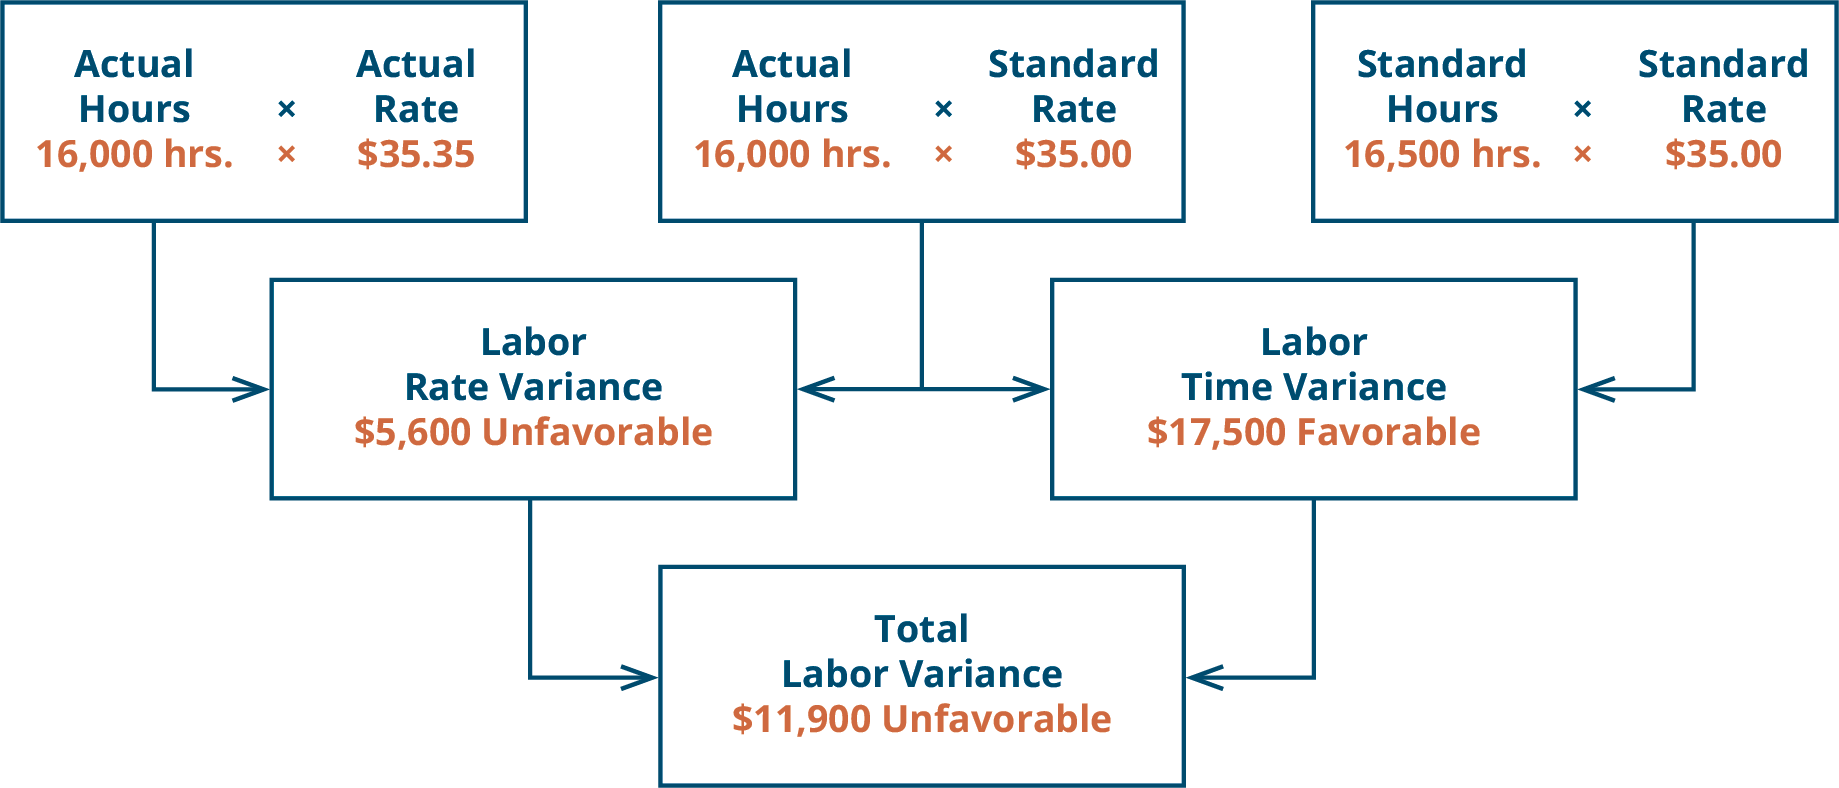 There are three top row boxes. Two, Actual Hours (16,000) times Actual Rate (💲35.35) and Actual Hours (16,000) times Standard Rate (💲35.00) combine to point to a Second row box: Direct Labor Rate Variance 💲5,600 U. Two top row boxes: Actual Hours (16,000) times Standard Rate (💲35.00) and Standard Hours (16,500) times Standard Rate (💲35.00) combine to point to Second row box: Direct Labor Time Variance 💲17,500 F. Notice the middle top row box is used for both of the variances. Second row boxes: Direct Labor Rate Variance 💲5,650 U and Direct Labor Time Variance 💲17,500 F combine to point to bottom row box: Total Direct Labor Variance 💲11,900 U.